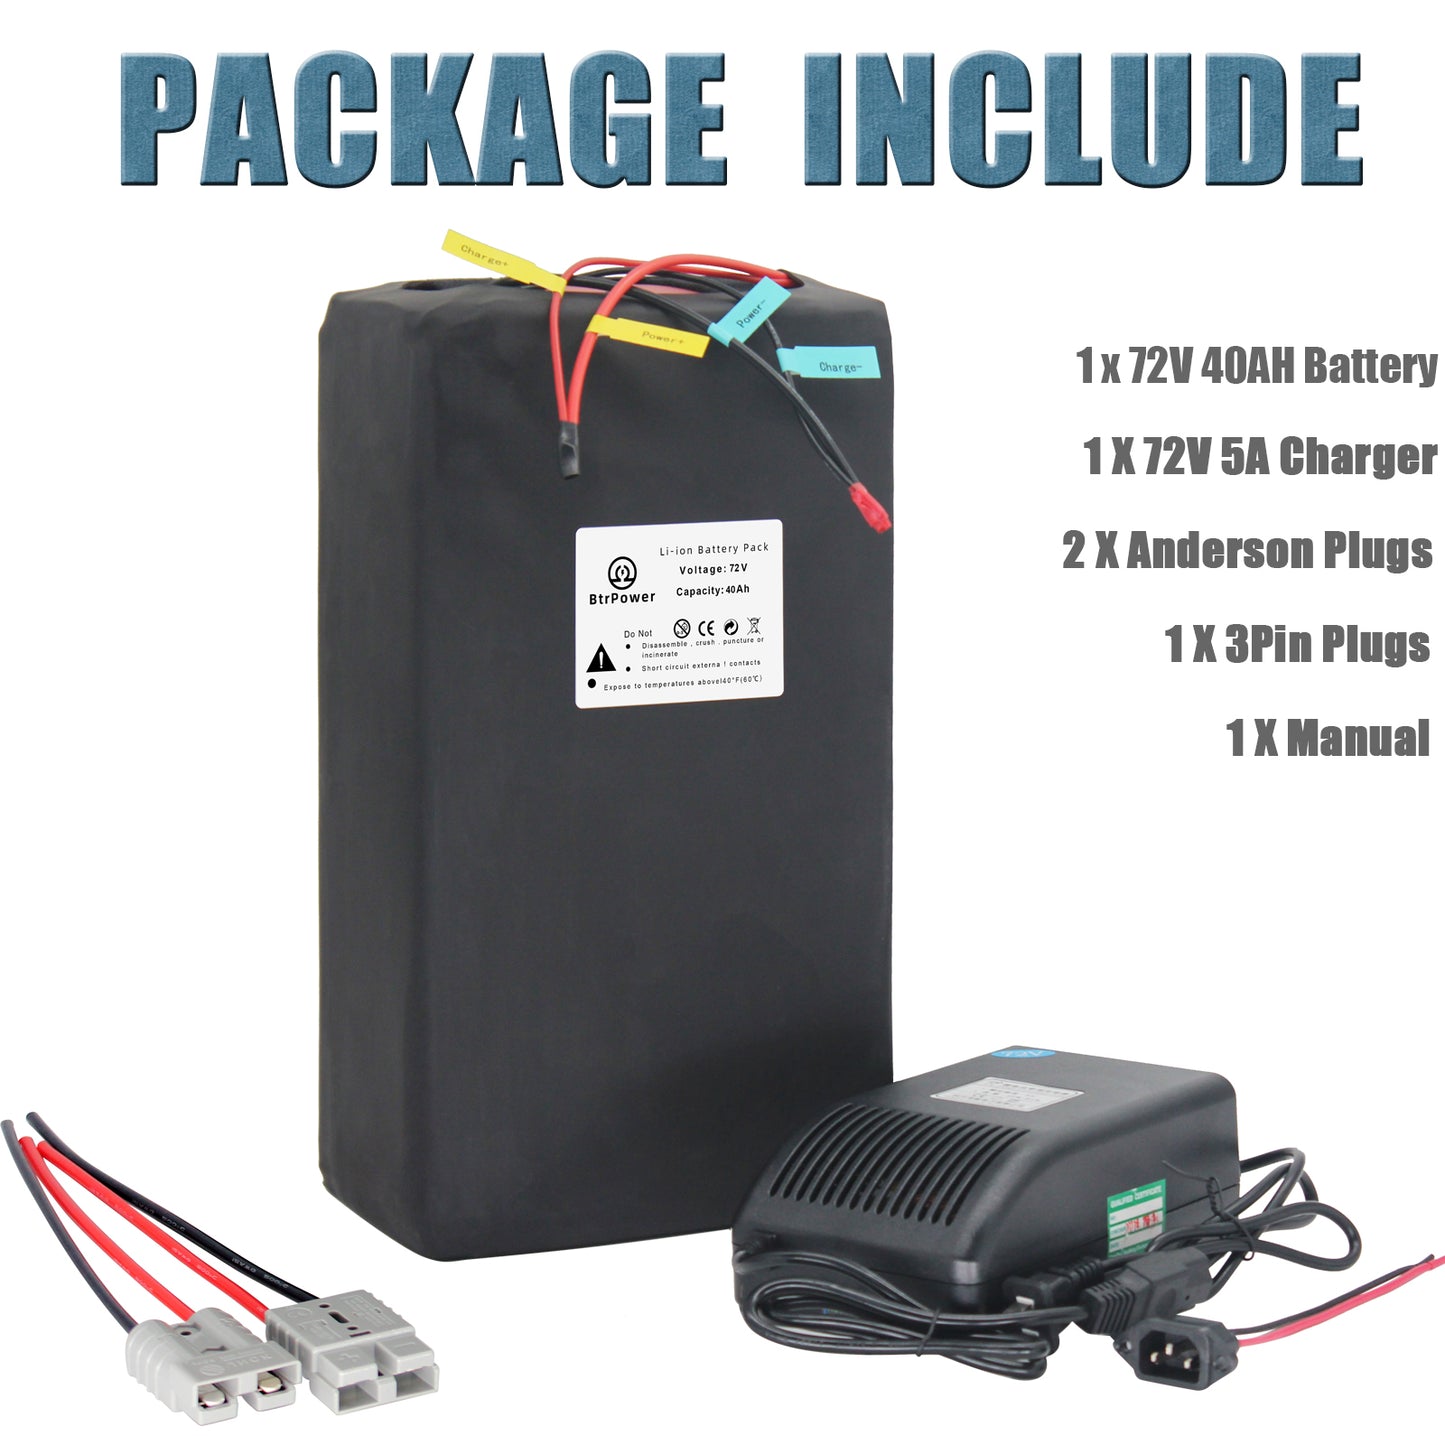 BtrPower Ebike Battery 72V 40AH Li-ion Battery Pack with 5A Charger 50A BMS